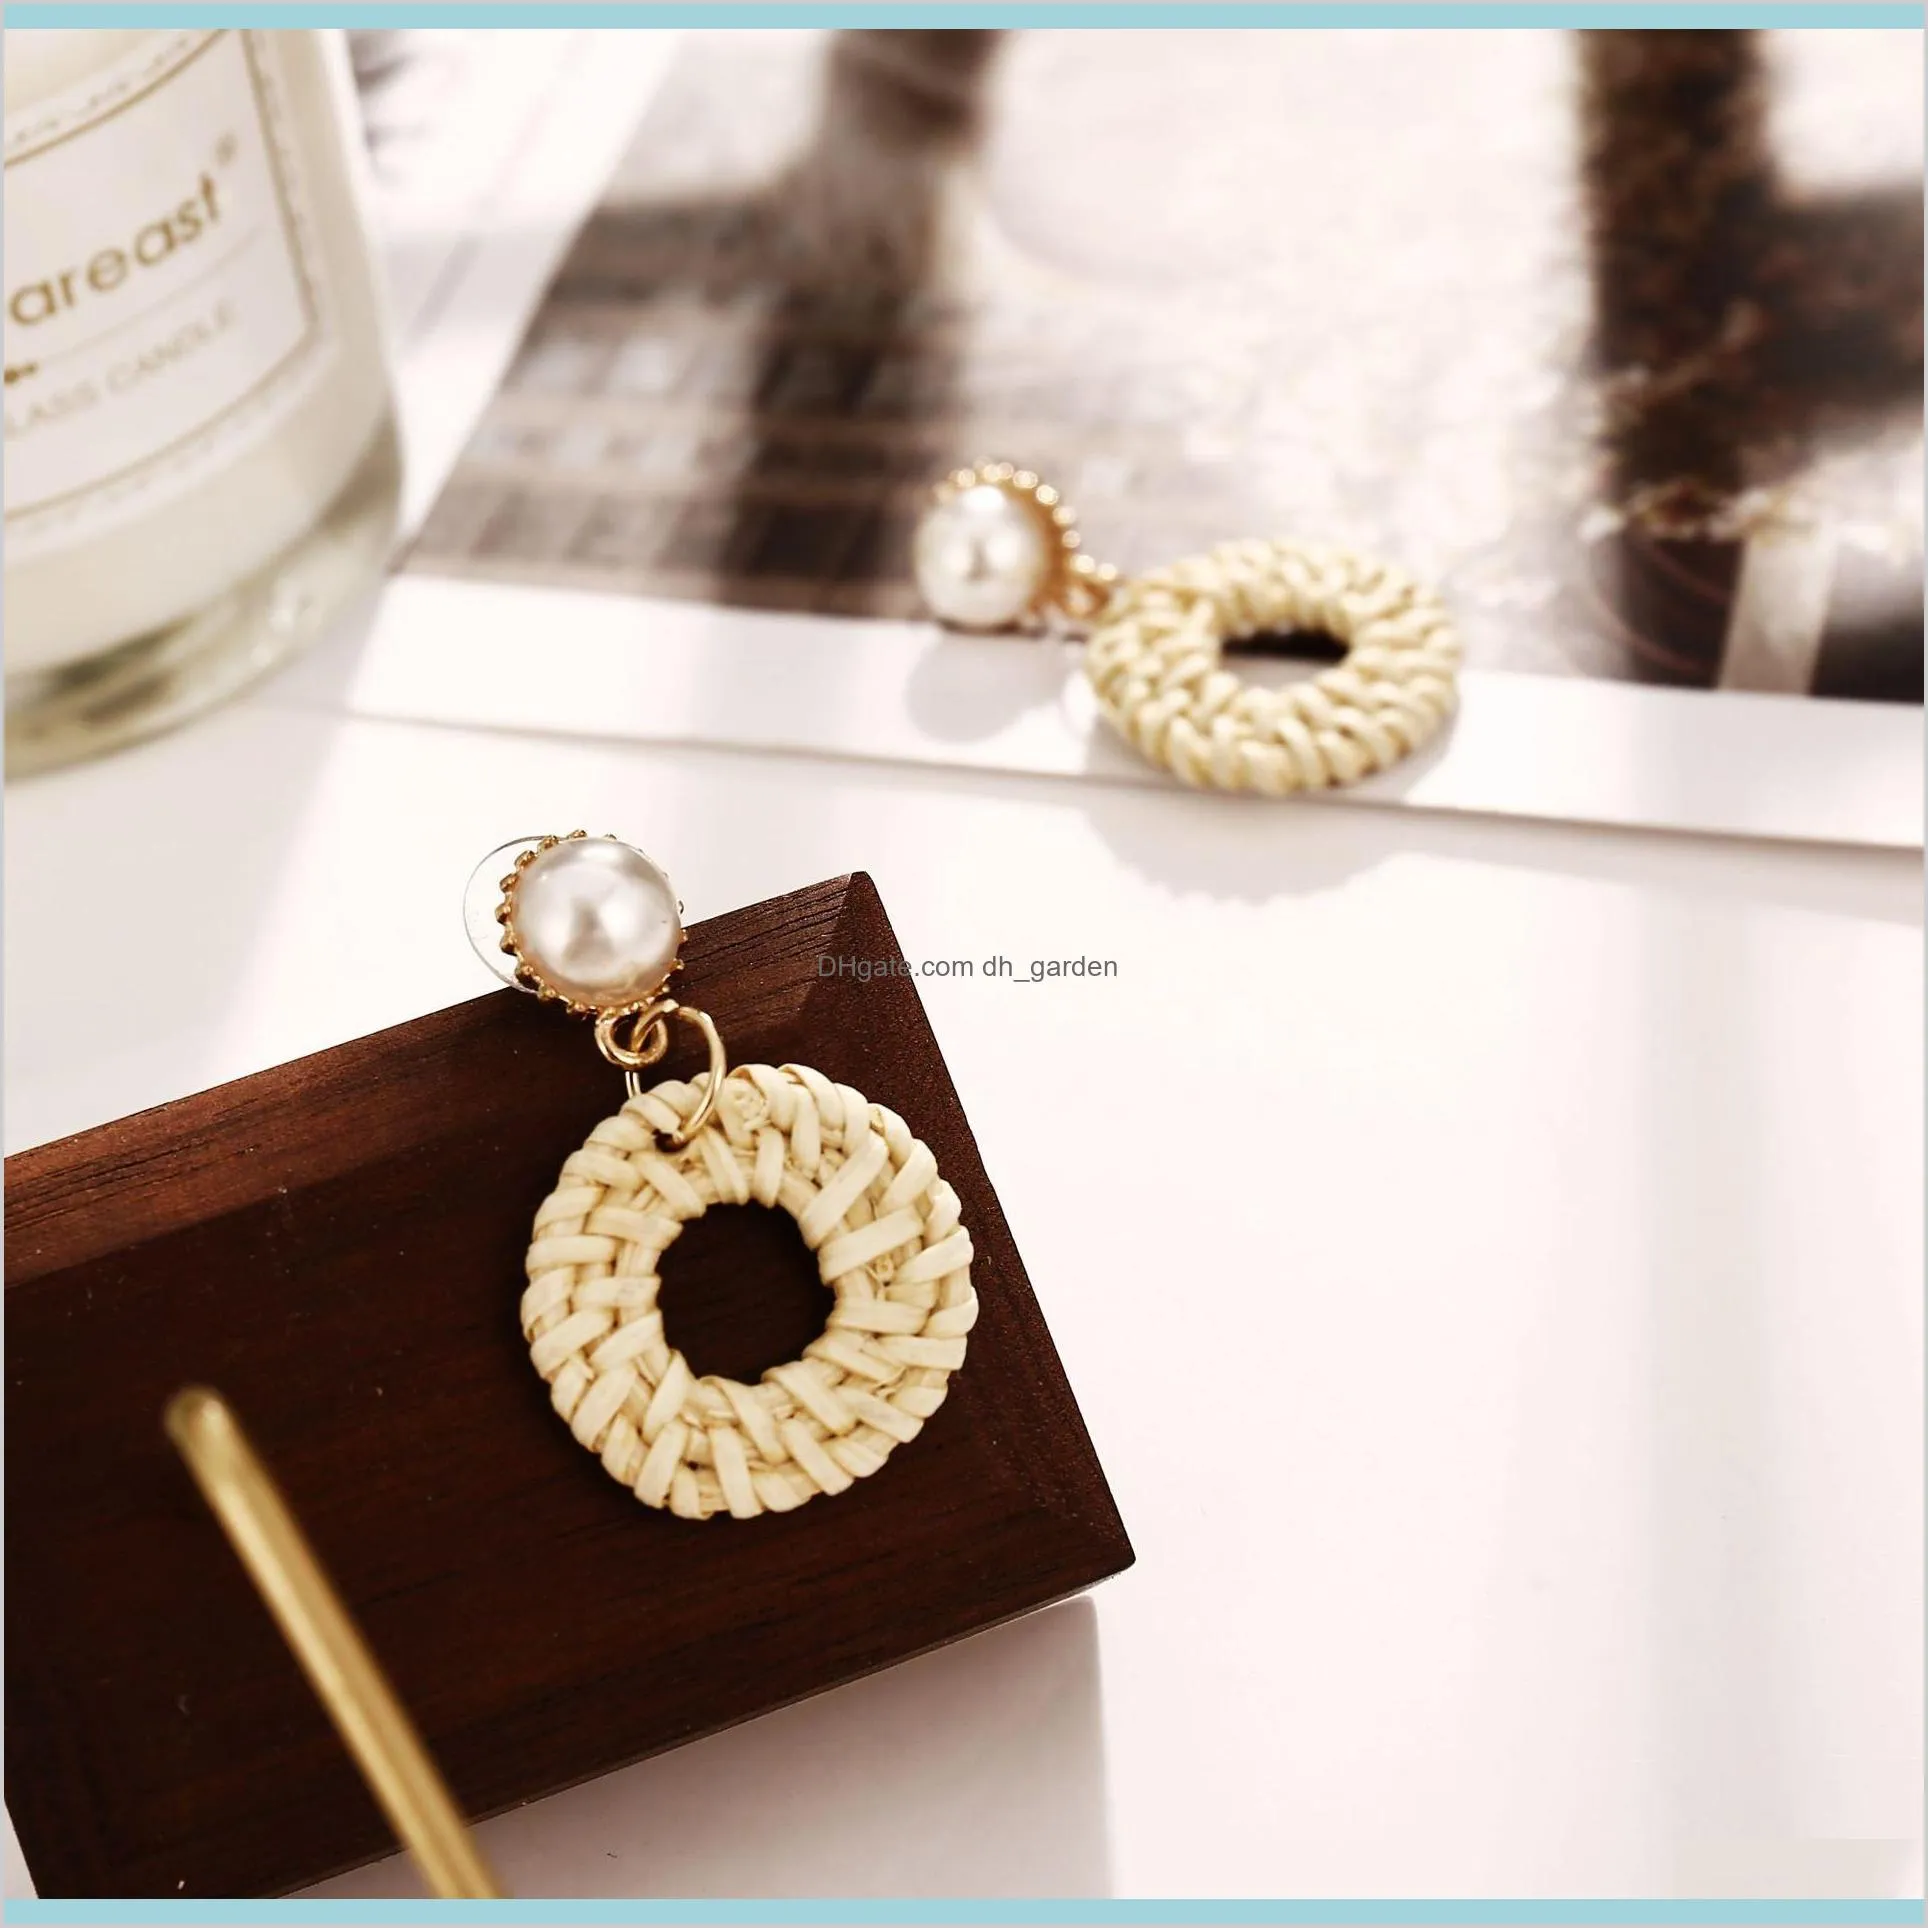 unique design small geometric stud earrings for women round circle earrings wooden imitation pearls creative woven beige earring